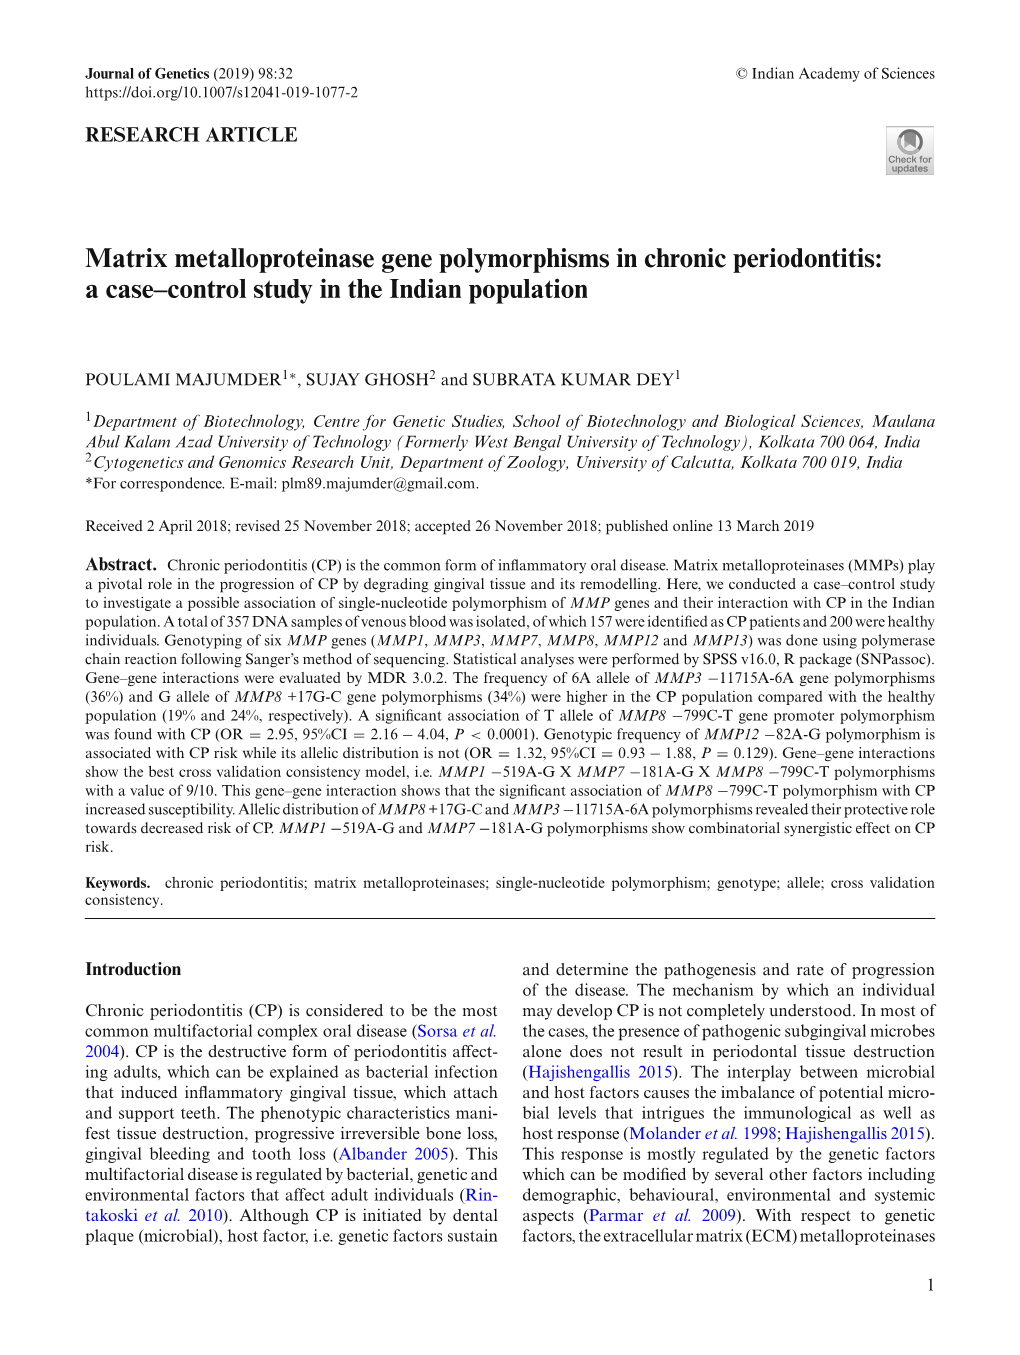 Matrix Metalloproteinase Gene Polymorphisms in Chronic Periodontitis: a Case–Control Study in the Indian Population